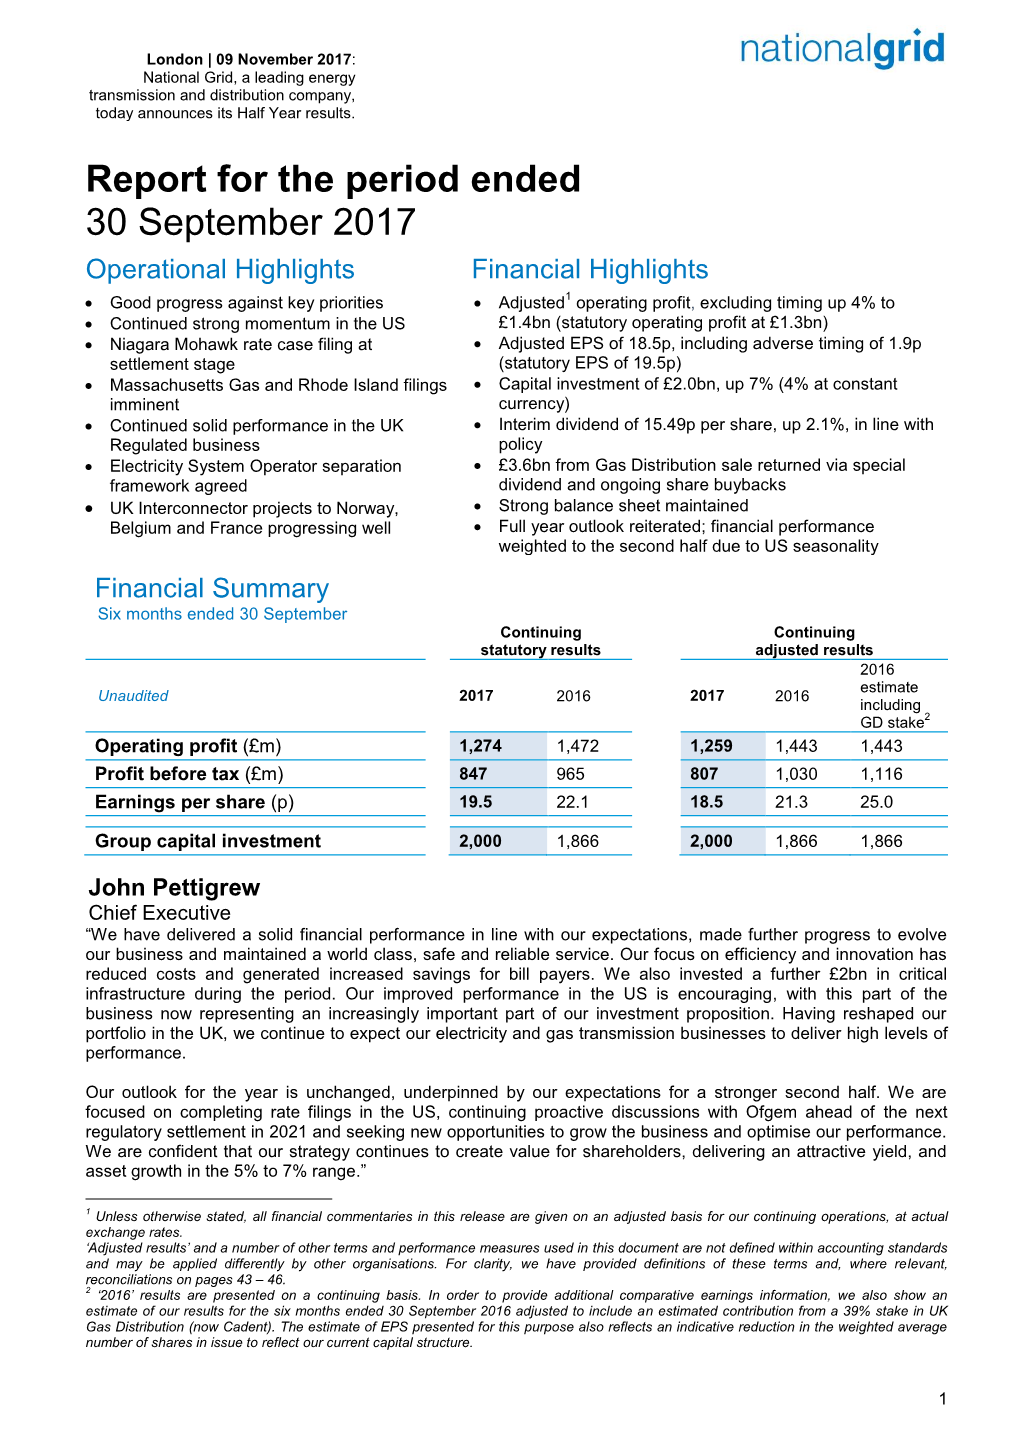 Report for the Period Ended 30 September 2017